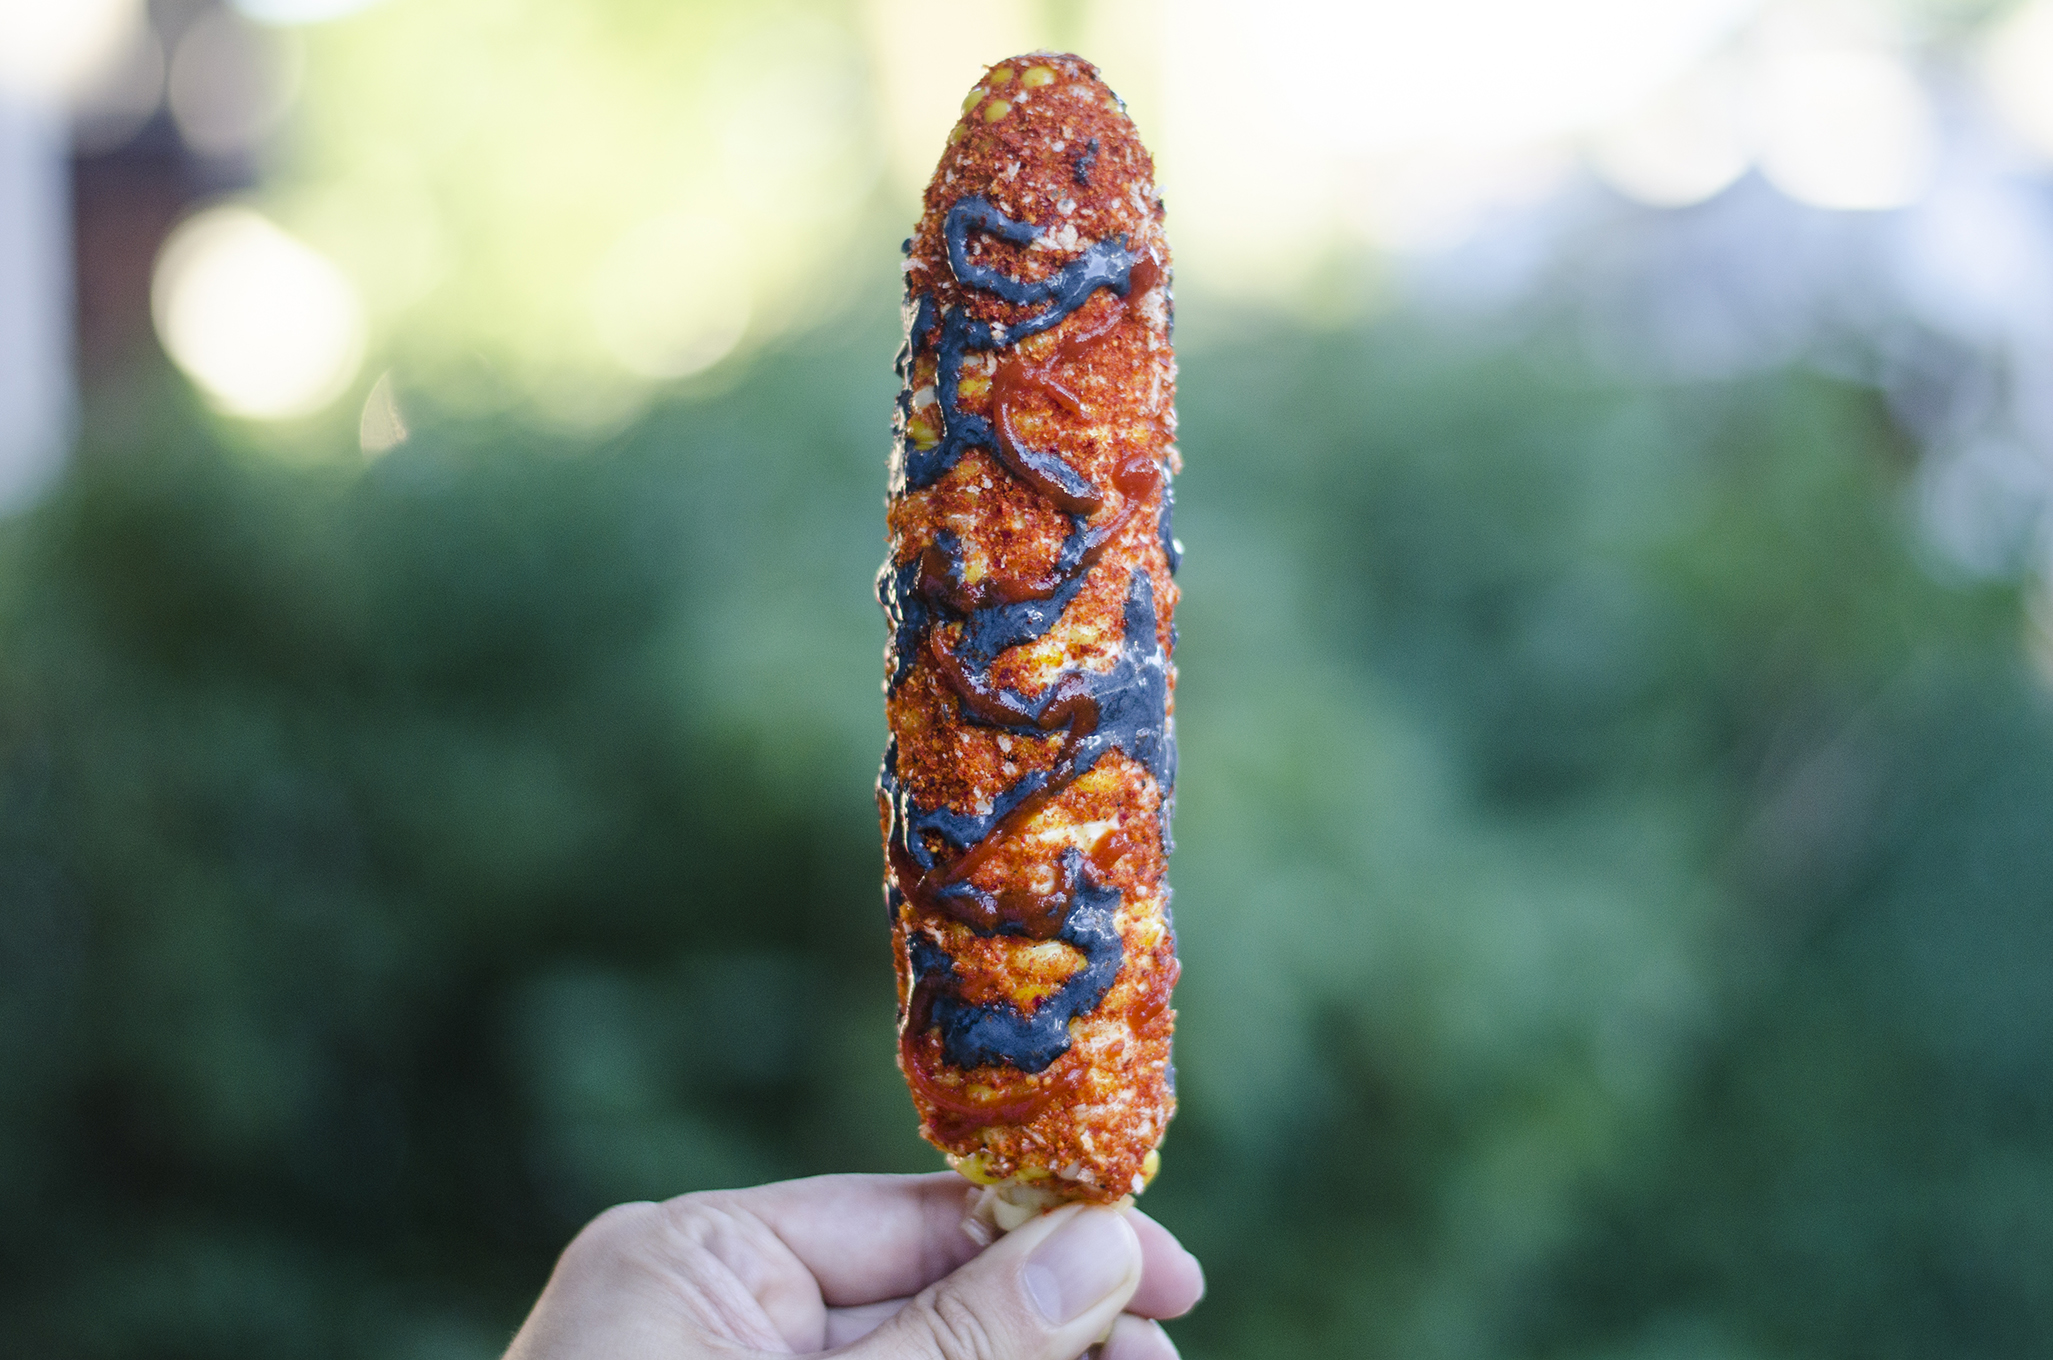 WindsorEats' spicy take on Mexican street corn.